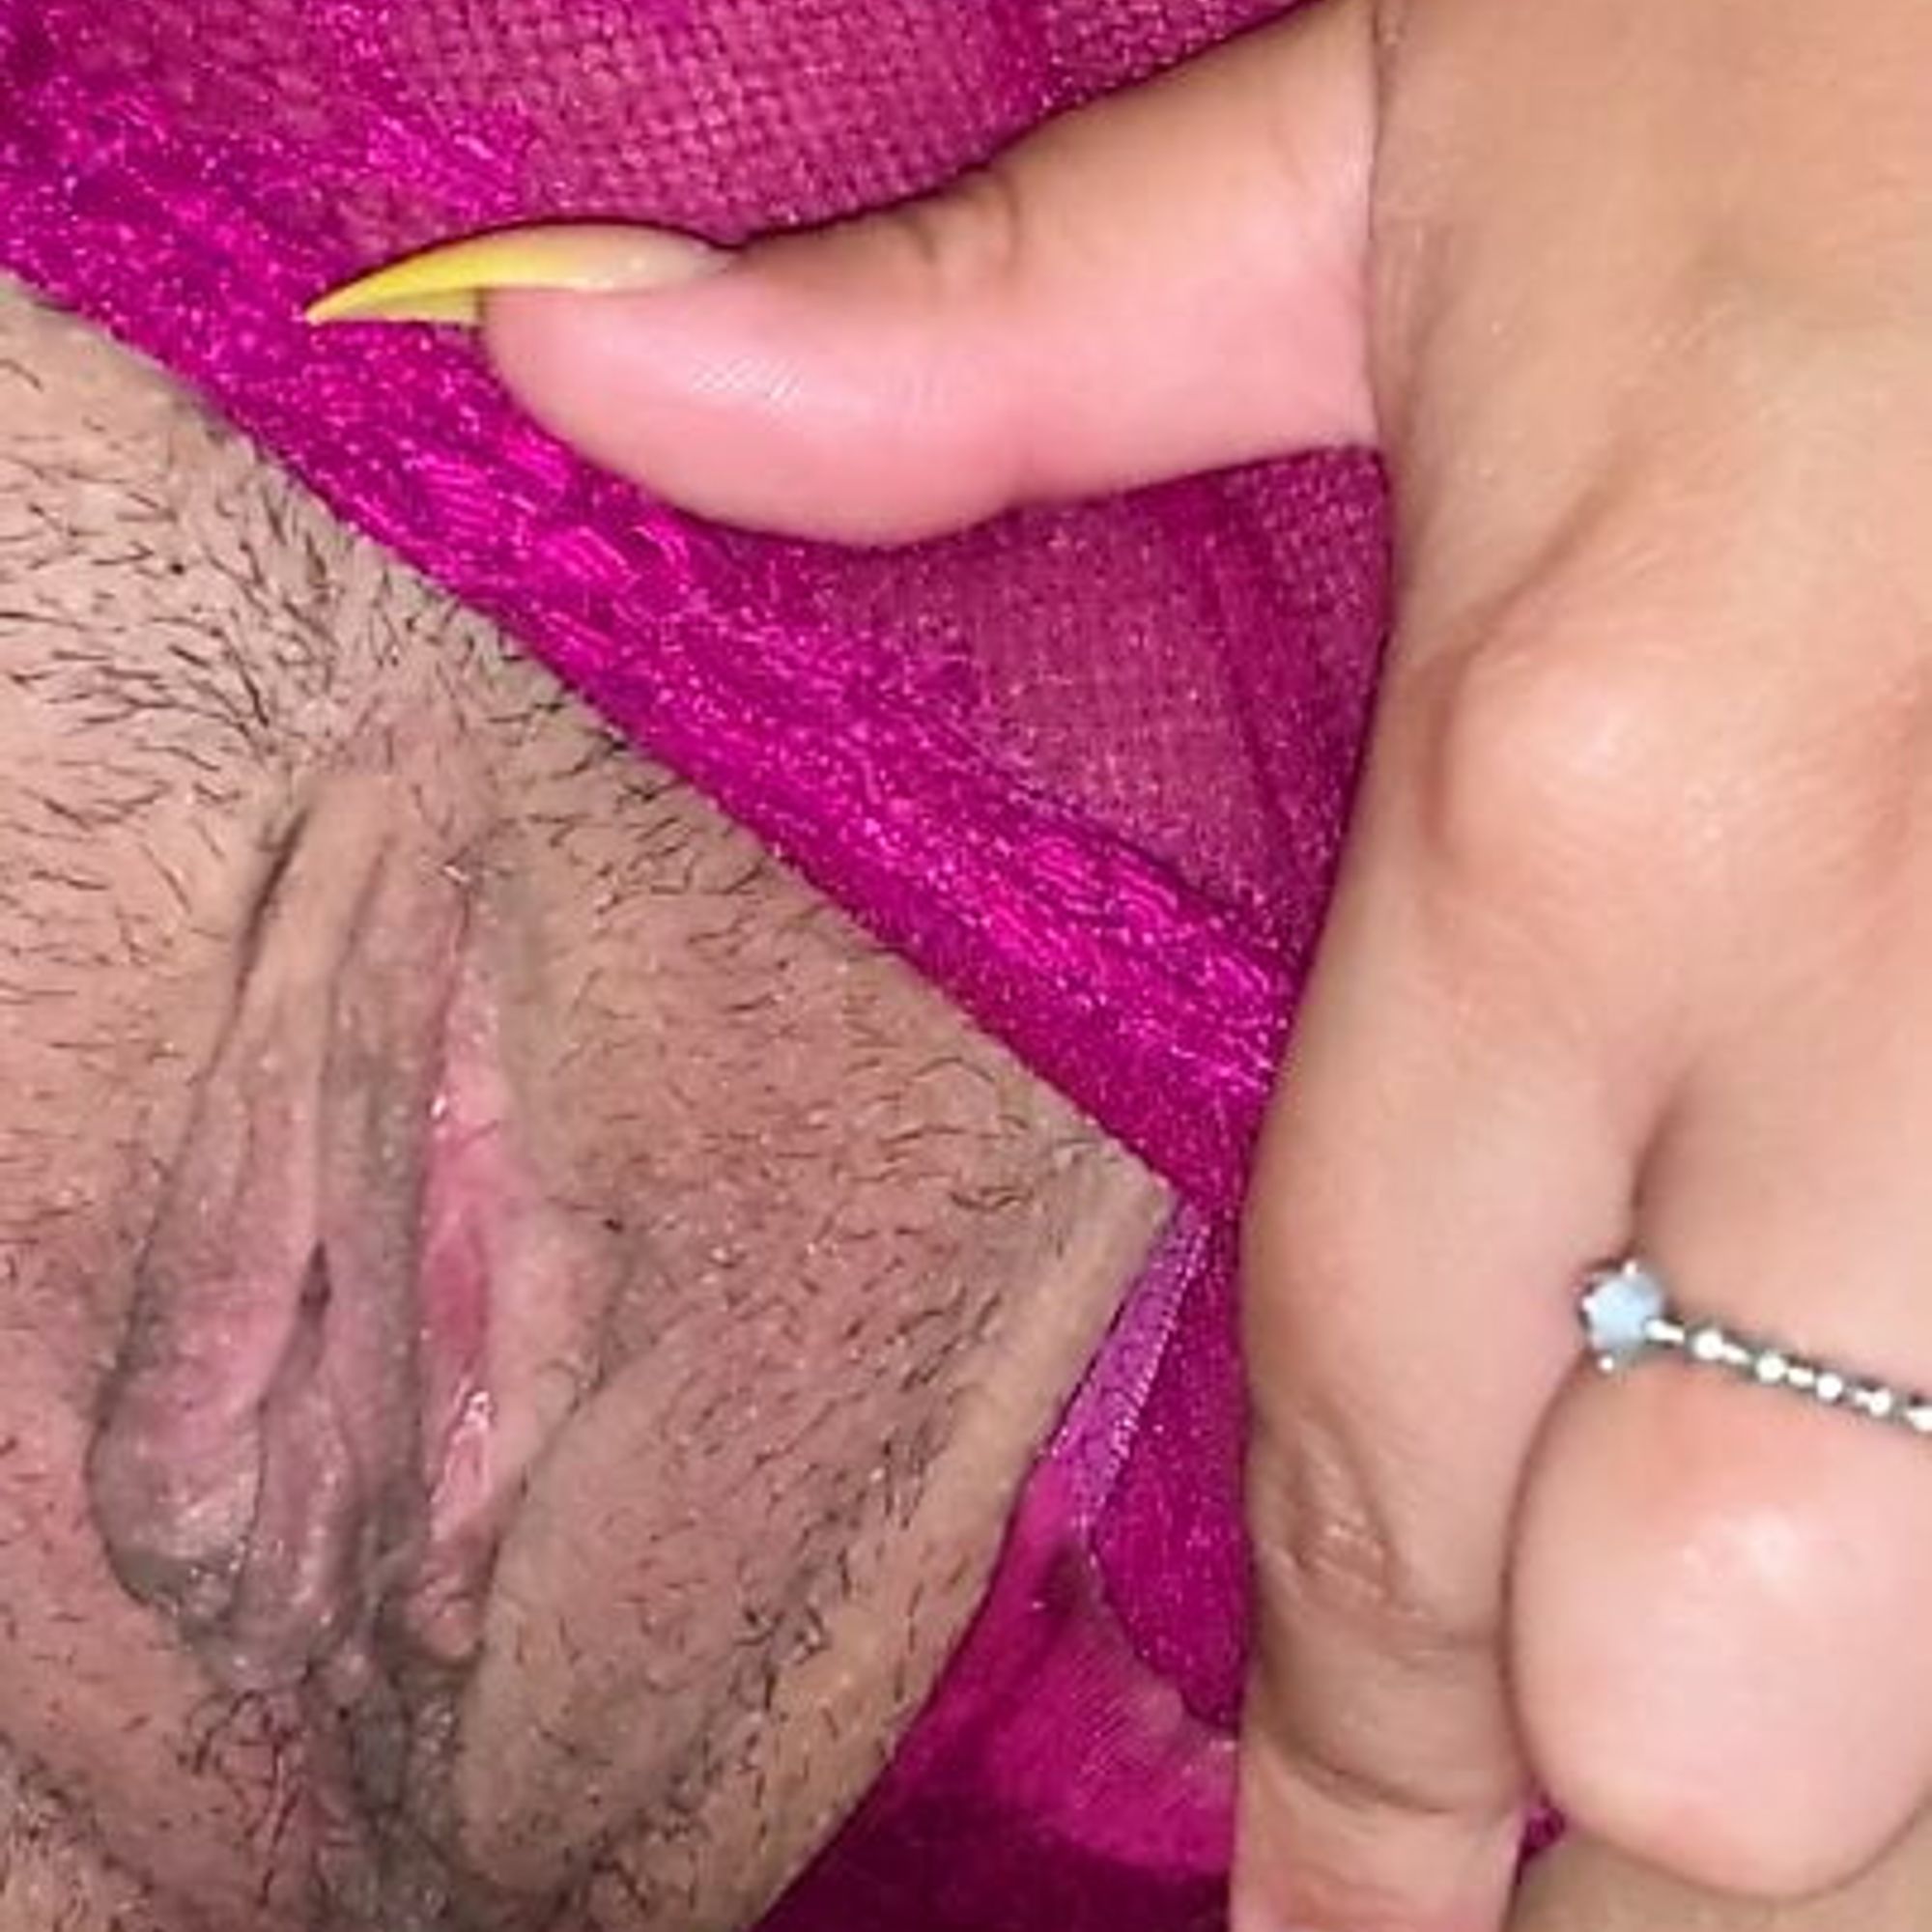 British Amateur Dirty Talking Slut Wife Talks About Wanting Cock & Pussy - She Plays With Cuck Hubby’s Cum After Cumshot